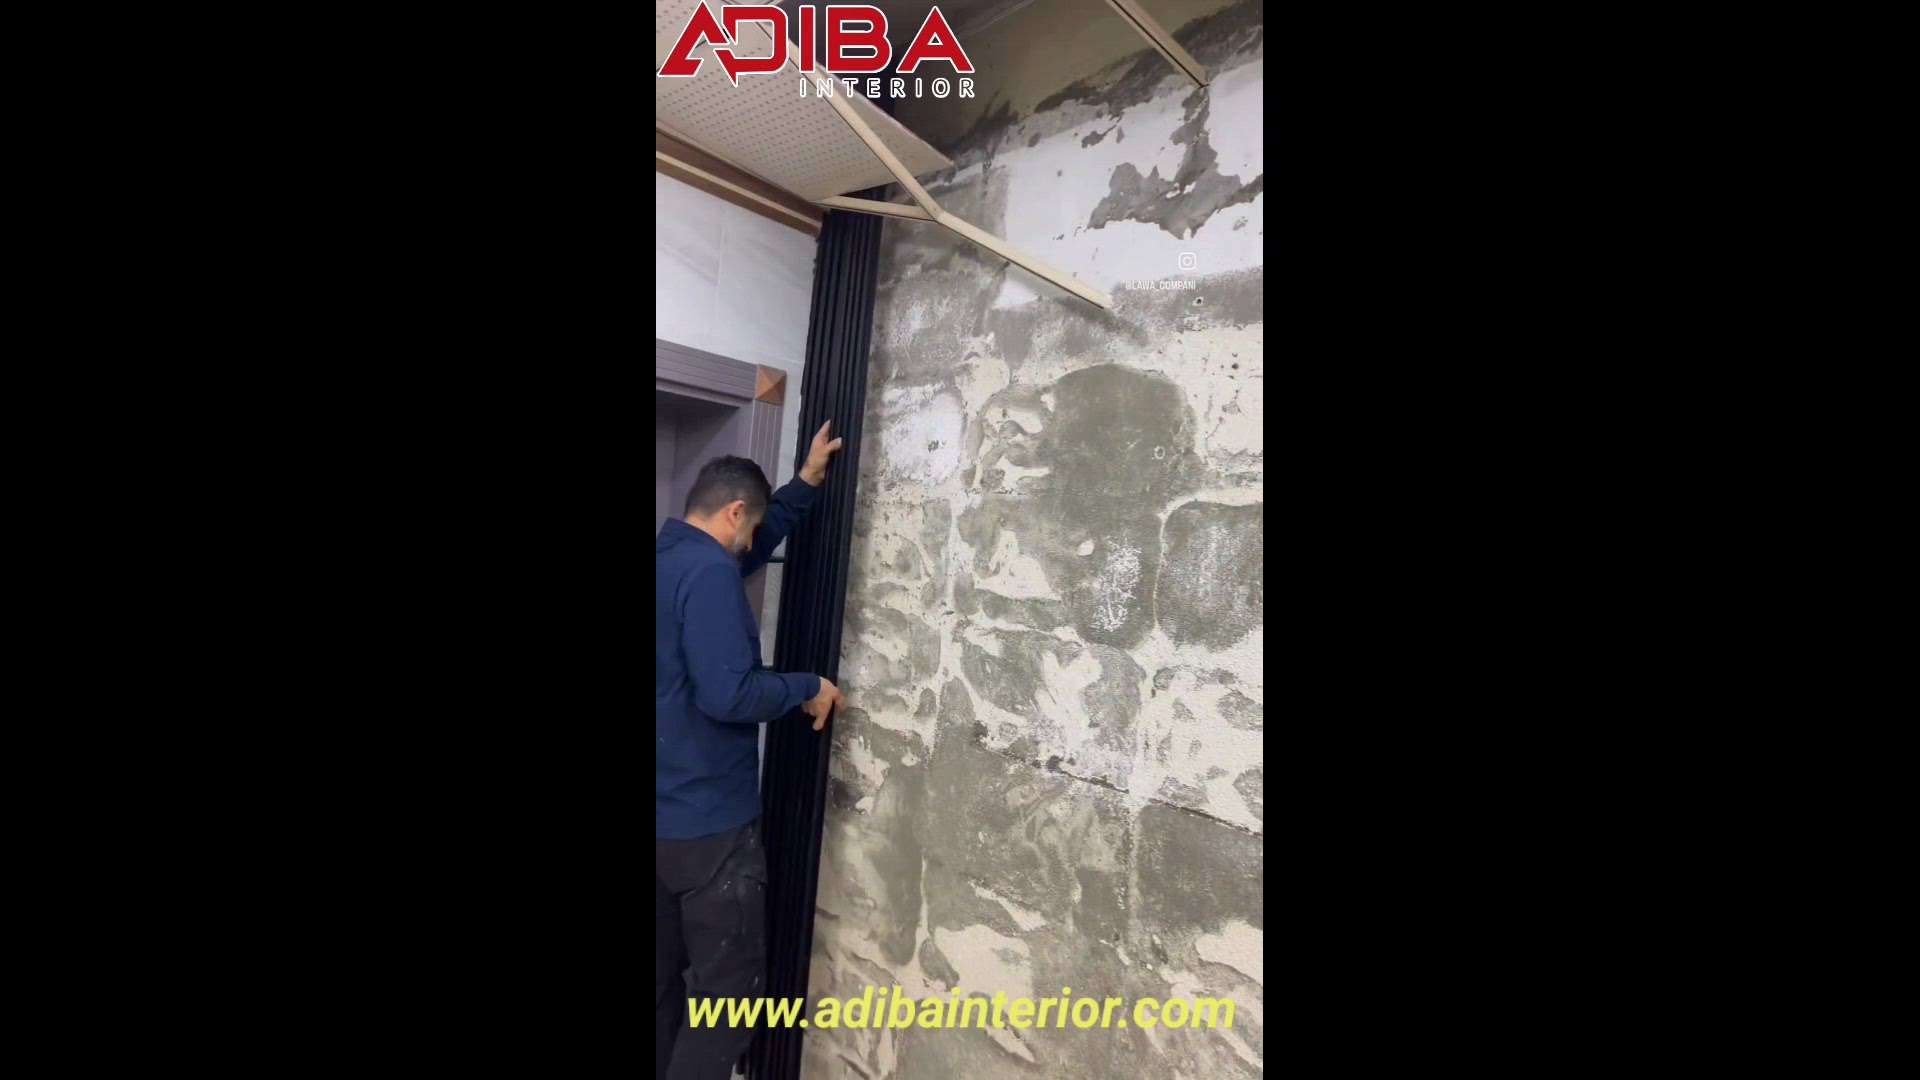 #adibainterior #Adibainterior𝐖𝐞 𝐚𝐫𝐞 𝐭𝐨𝐩 𝐬𝐞𝐥𝐥𝐞𝐫 𝐢𝐧 𝐋𝐨𝐮𝐯𝐞𝐫'𝐬 𝐩𝐚𝐧𝐞𝐥 𝐢𝐧 𝐈𝐧𝐝𝐢𝐚.𝐏𝐮𝐫𝐜𝐡𝐚𝐬𝐞 𝐡𝐢𝐠𝐡 𝐪𝐮𝐚𝐥𝐢𝐭𝐲 𝐖𝐏𝐂 𝐋𝐨𝐮𝐯𝐞𝐫𝐬 𝐩𝐚𝐧𝐞𝐥 𝐭𝐨 𝐞𝐧𝐡𝐚𝐧𝐜𝐞 𝐭𝐡𝐞 𝐛𝐞𝐚𝐮𝐭𝐲 𝐨𝐟 𝐲𝐨𝐮𝐫 𝐥𝐢𝐯𝐢𝐧𝐠 𝐚𝐫𝐞𝐚𝐬.
.
.
.
Modern touch 🏠
Eco friendly 🌳
Easy to clean 🧽
Fast to install 🛠️
Water resistant 💦
Available in several textures
Visit us and check our collection of WPC Wall Panels

Contact us for more information and we will be more than glad to assist you 👇🏻

𝐅𝐨𝐫 𝐦𝐨𝐫𝐞 𝐢𝐧𝐟𝐨, 𝐩𝐥𝐞𝐚𝐬𝐞 𝐜𝐚𝐥𝐥/ 𝐭𝐞𝐱𝐭 𝐮𝐬; 𝐎𝐫𝐝𝐞𝐫 𝐧𝐨𝐰!!!

𝘈𝘭𝘭 𝘪𝘯𝘵𝘦𝘳𝘪𝘰𝘳 𝘚𝘰𝘭𝘶𝘵𝘪𝘰𝘯𝘴 & 𝘏𝘰𝘮𝘦 𝘋𝘦𝘤ore
📦 Product/Service: PVC Panels, Wallpapers, Artificial Grass, UV sheets and Many More.
📲 Call : 9319882447 interioradiba@gmail.com
🏬 Walk In niwari  𝐫𝐨𝐚𝐝, 𝐌𝐨𝐝𝐢𝐧𝐚𝐠𝐚𝐫, 𝐔𝐭𝐭𝐚𝐫 𝐏𝐫𝐚𝐝𝐞𝐬𝐡 𝟐𝟎𝟏𝟐𝟎4

#ceilings #architecture #adibainterior #ceilingdesign #interiordesign #interior #interiordecore #decor #pane